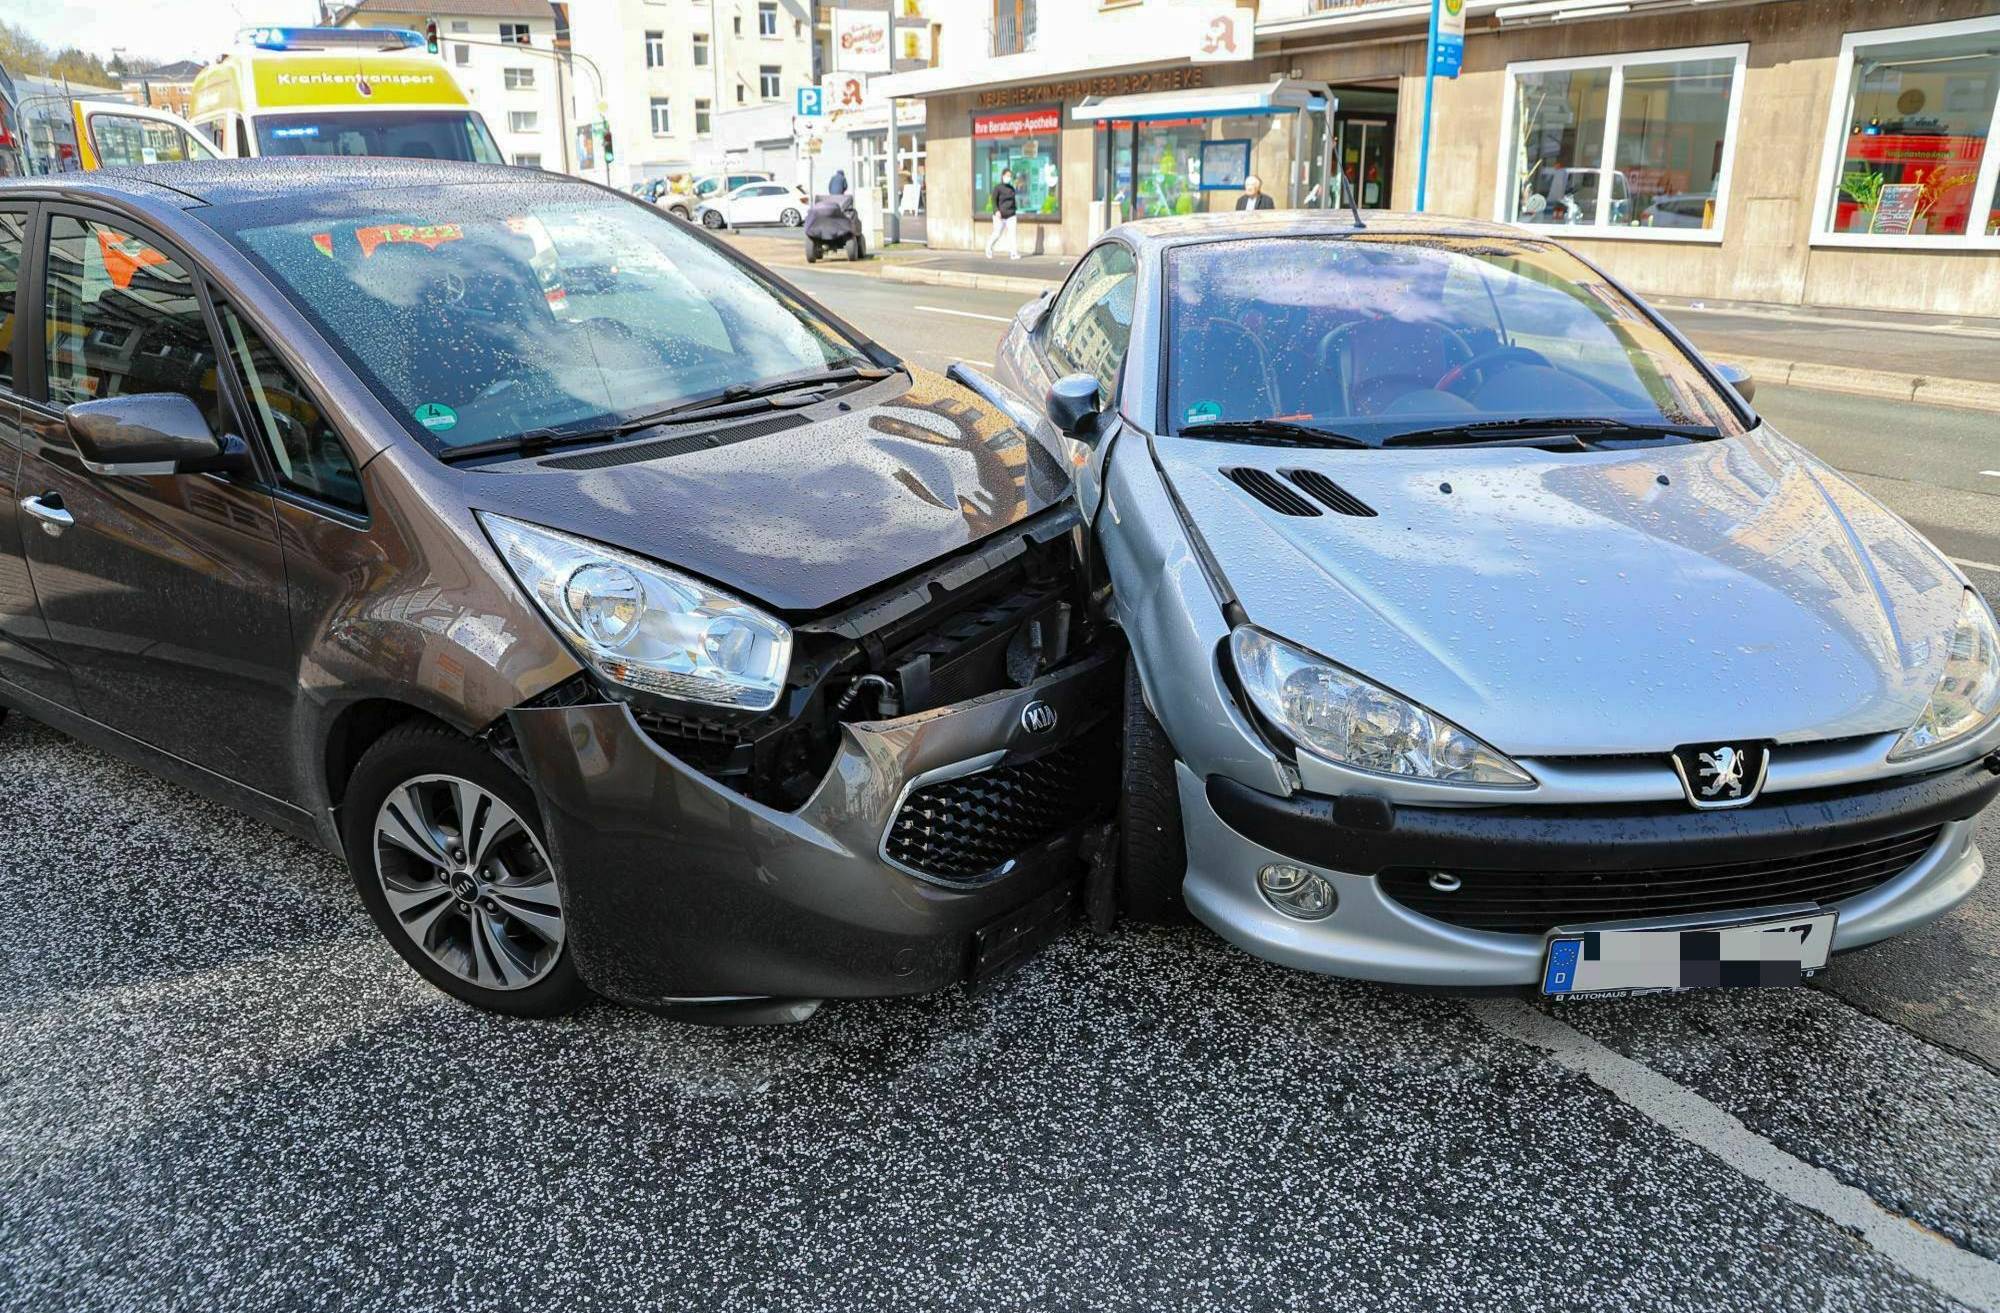 Unfall in Wuppertal-Heckinghausen